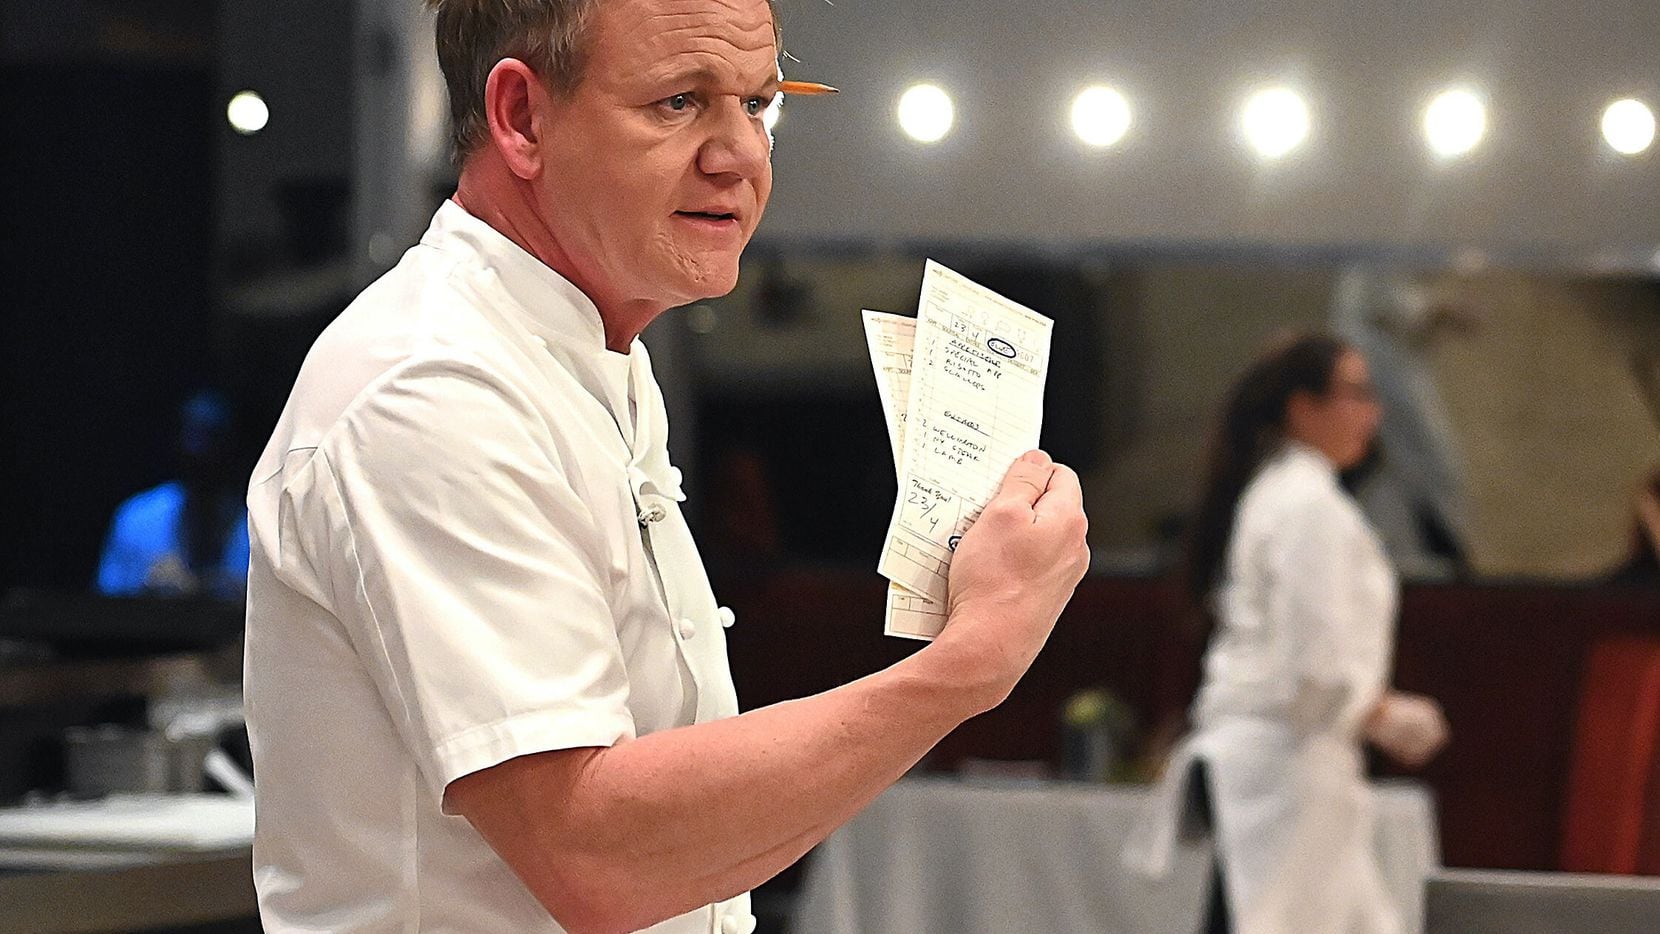 TV chef Gordon Ramsay is the star of the TV show 'Hell's Kitchen.' He has dozens of...